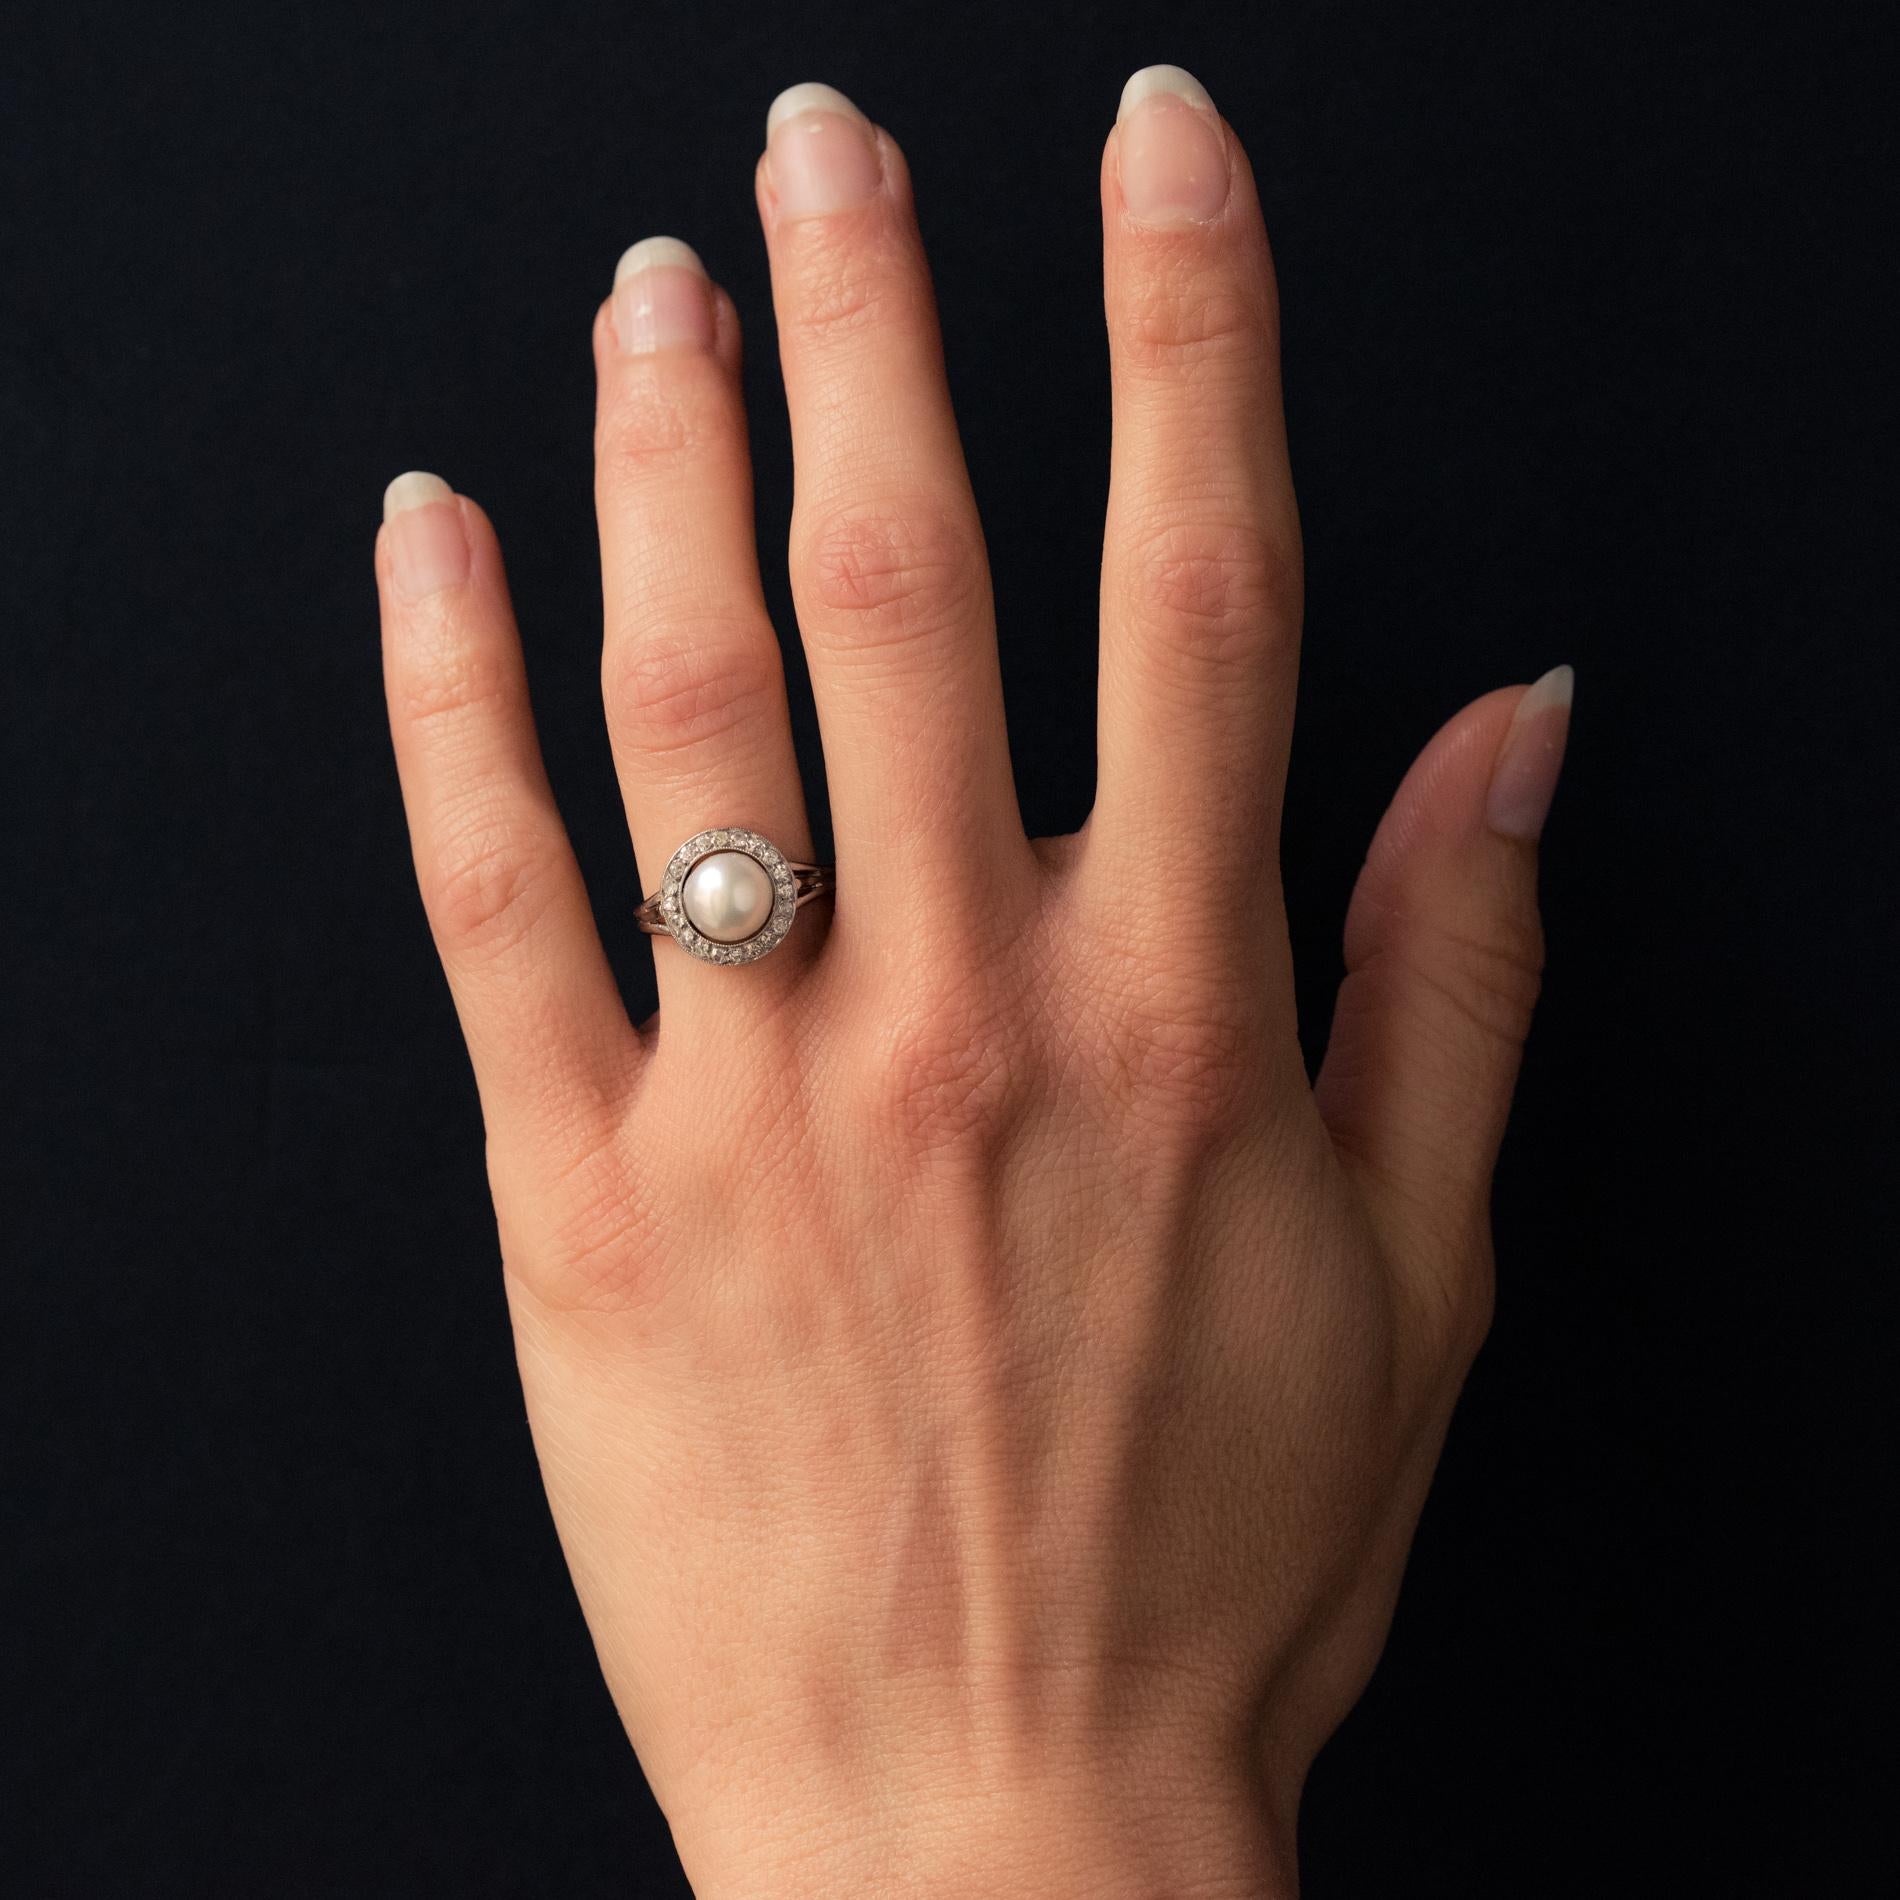 Ring in 18 karat white gold, eagle's head hallmark and platinum, dog's head hallmark.
Feminine antique ring, it is set, in a closed setting, in the center with a pearl white orient cultured pearl, in an entourage of diamonds. The ring of the